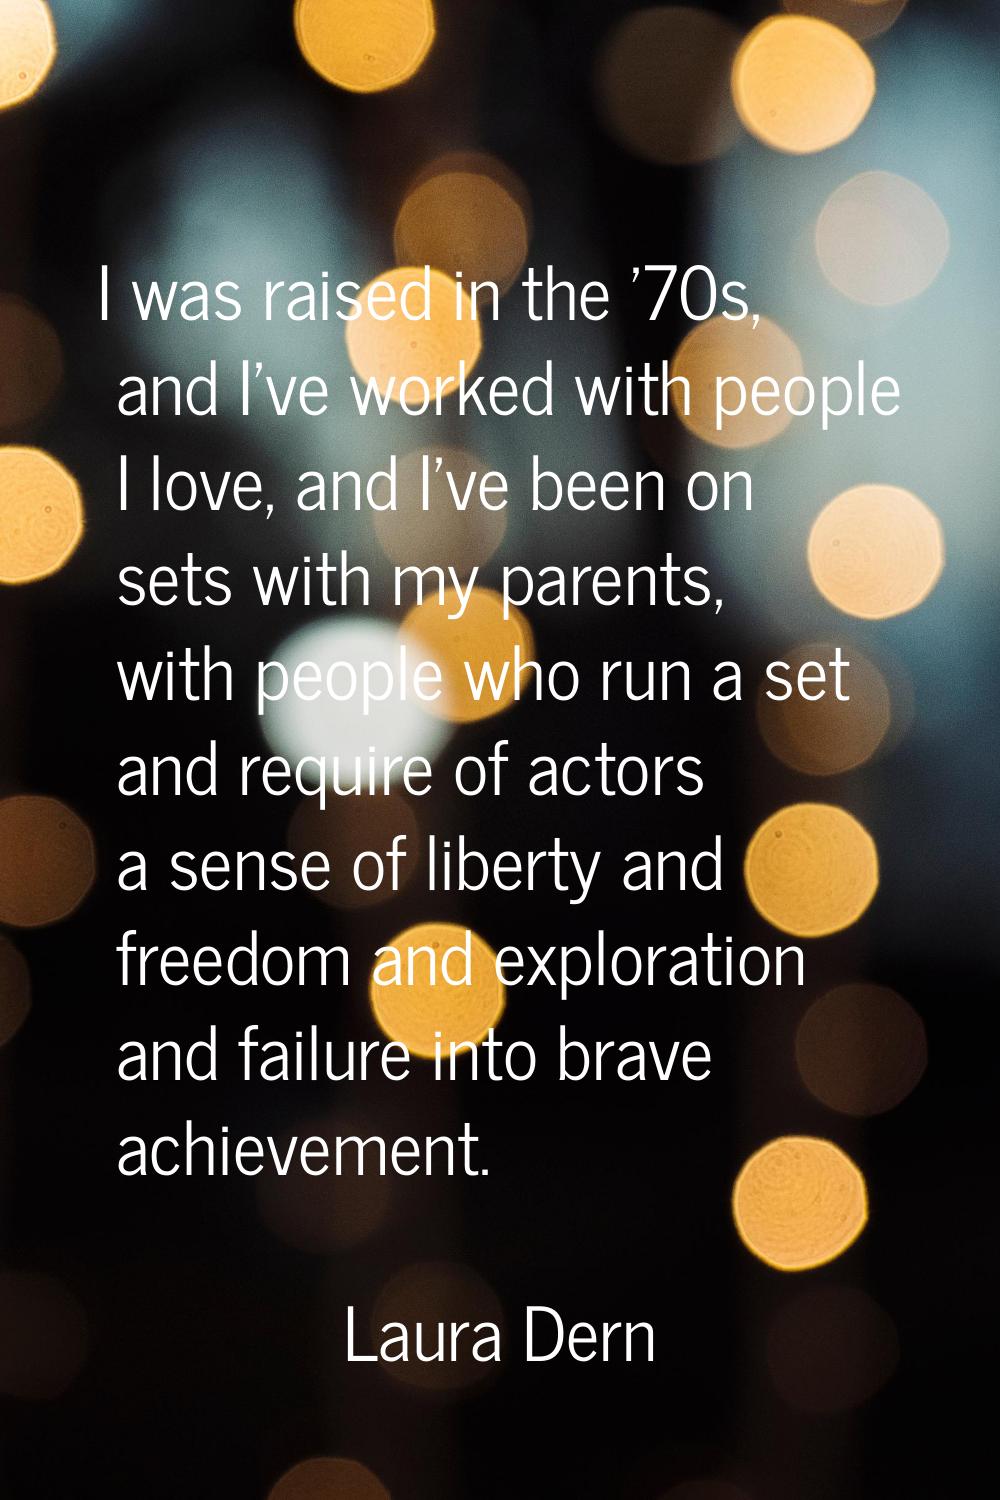 I was raised in the '70s, and I've worked with people I love, and I've been on sets with my parents